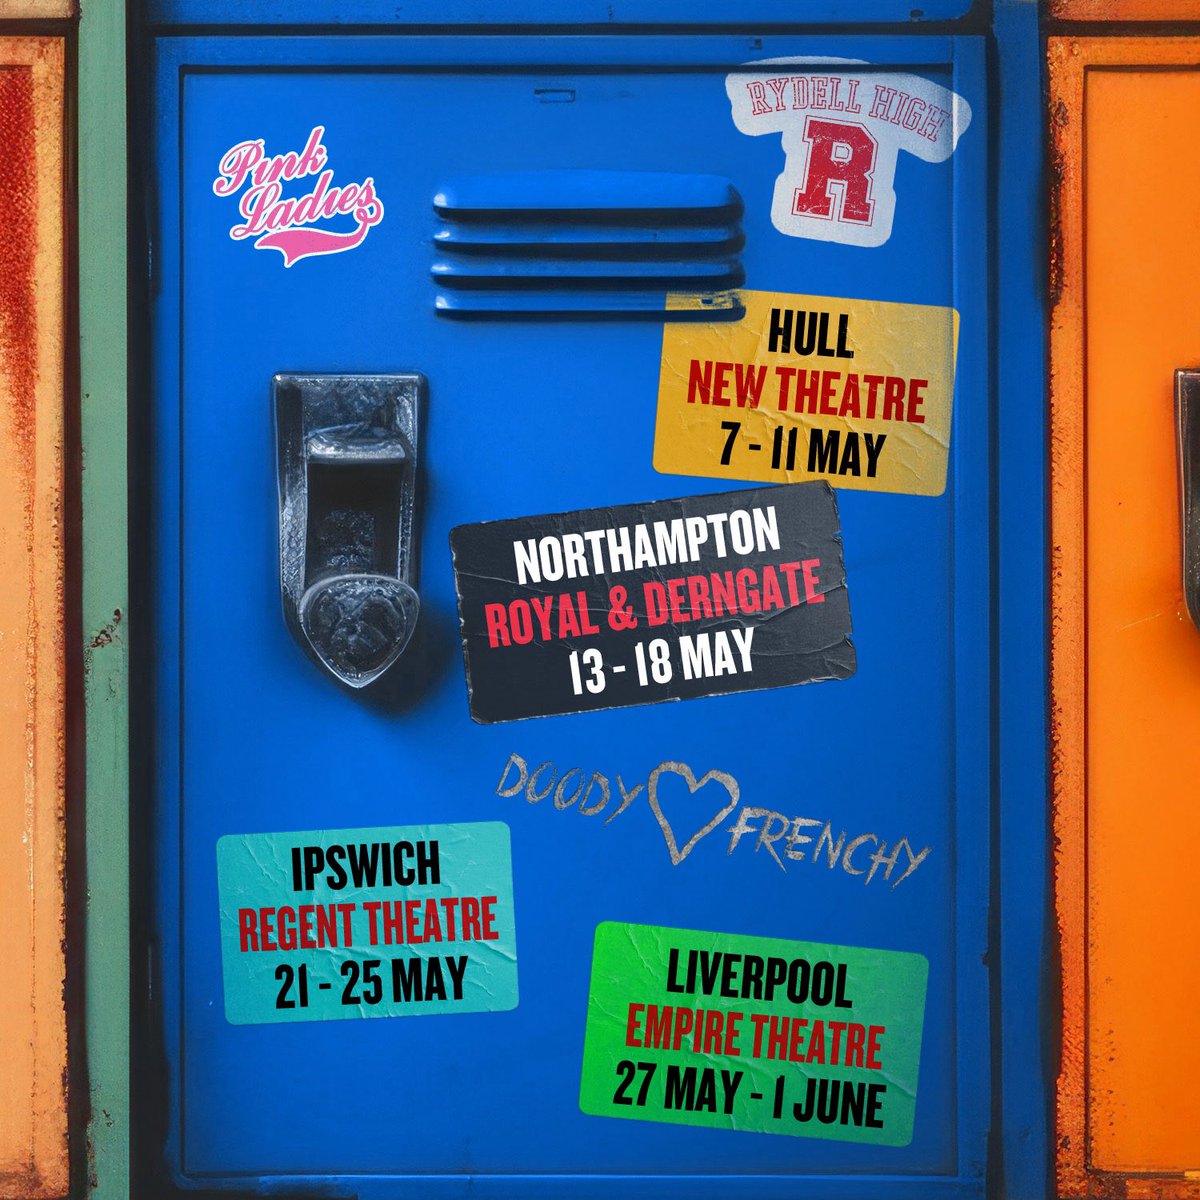 Jot these dates down in your diary, Grease is burnin' up the quarter mile this May coming to Hull, Northampton, Ipswich and Liverpool! 🔥 greasemusical.co.uk